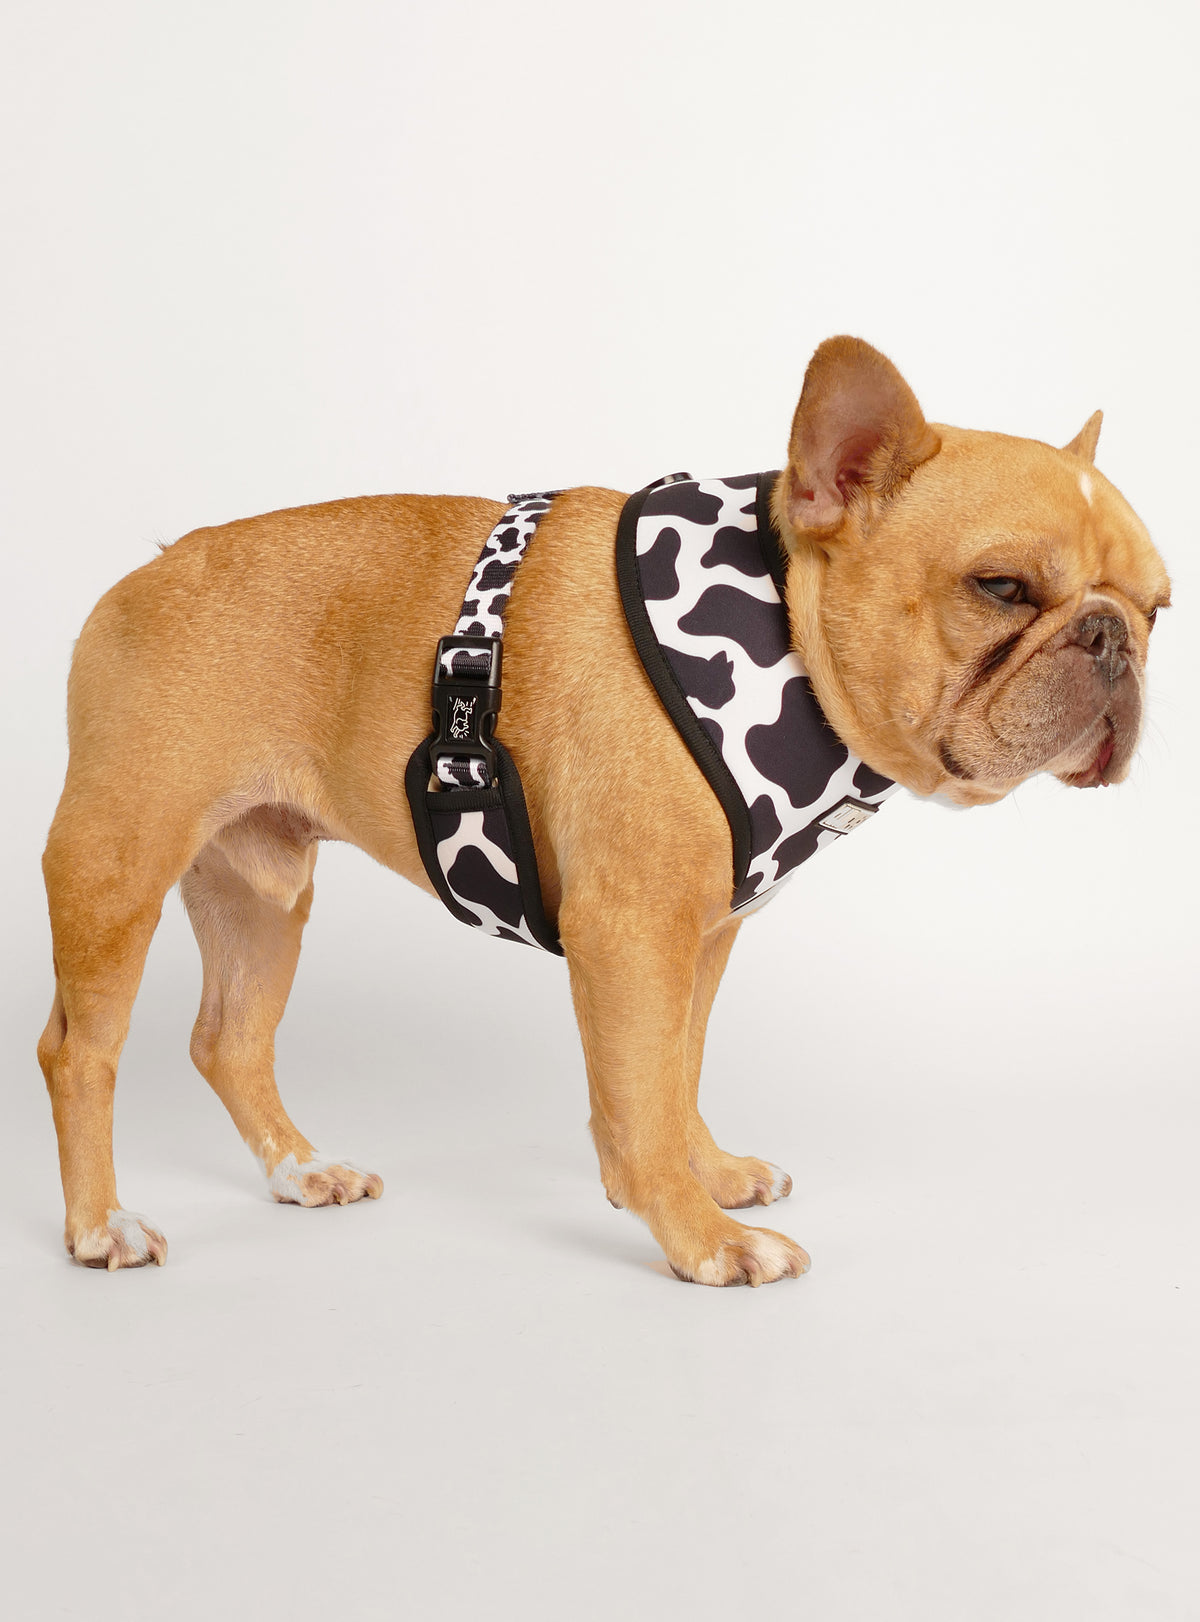 The Cow TV Reversible Harness